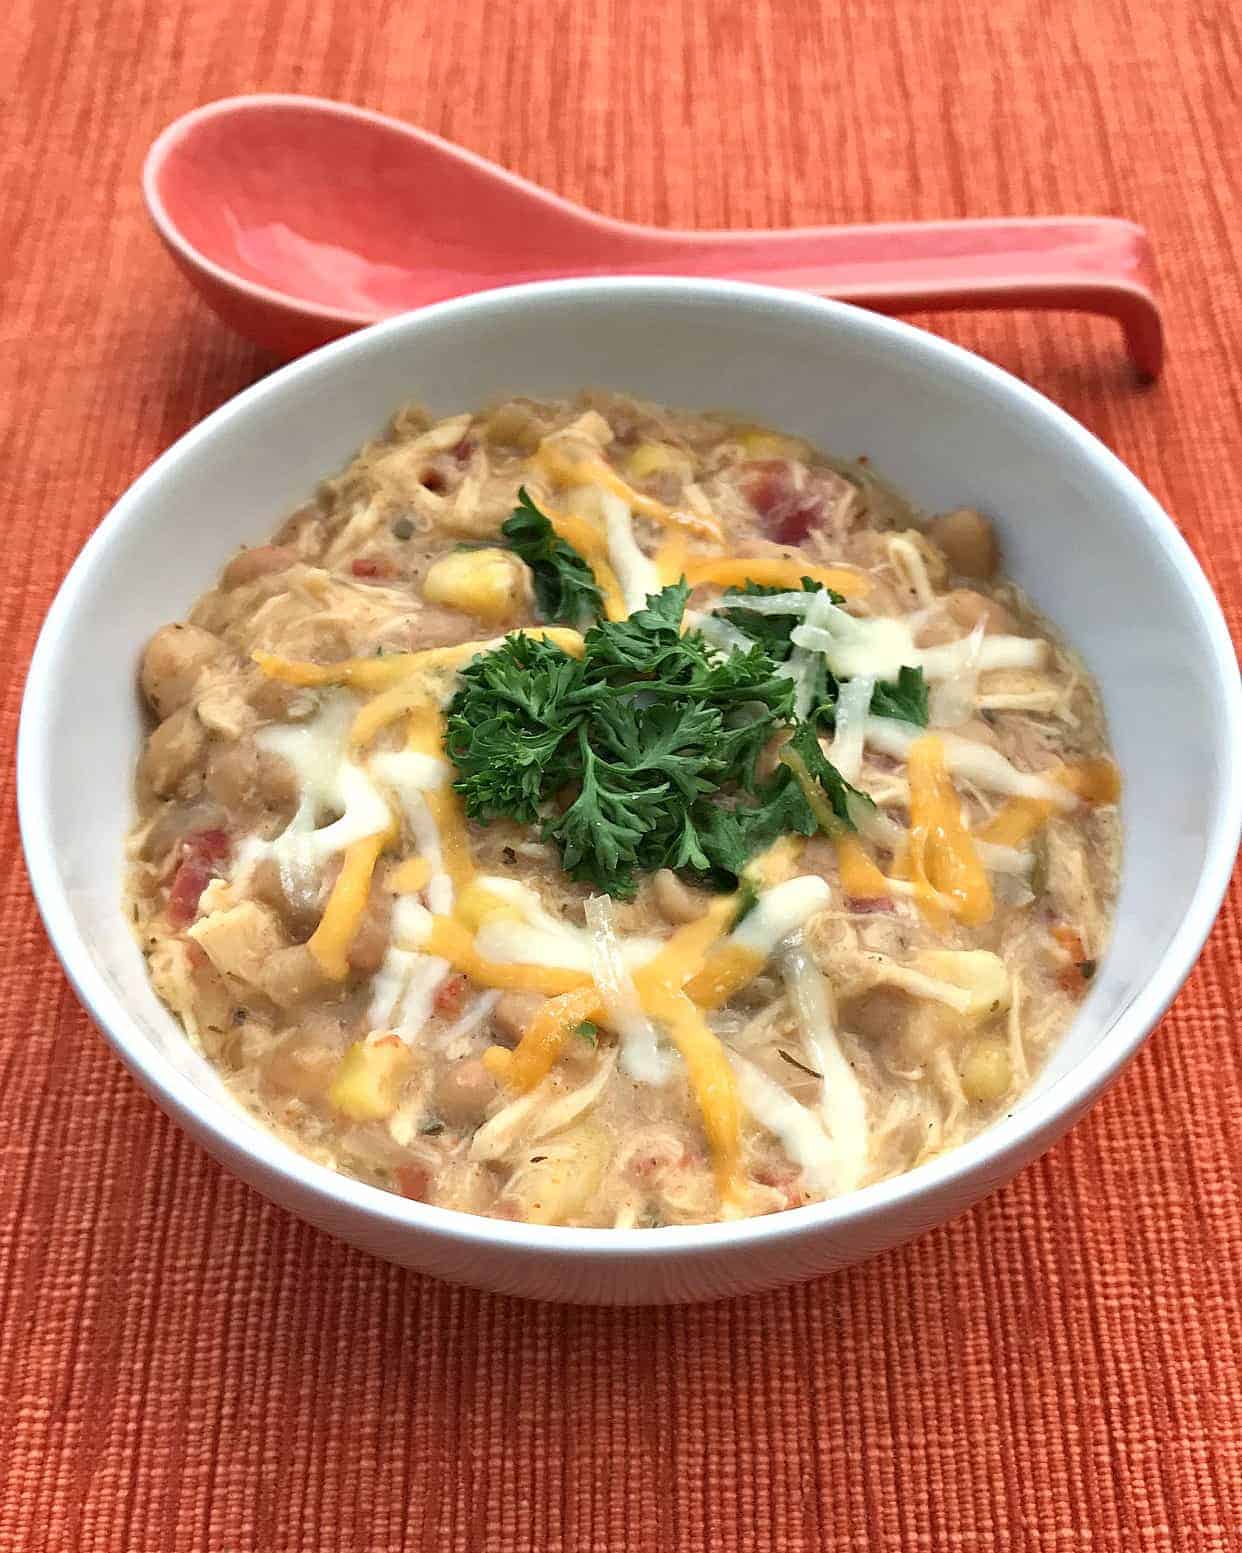 The Best Easy Slow Cooker Crockpot Creamy White Chicken Chili,Knitting Vs Crocheting Difference